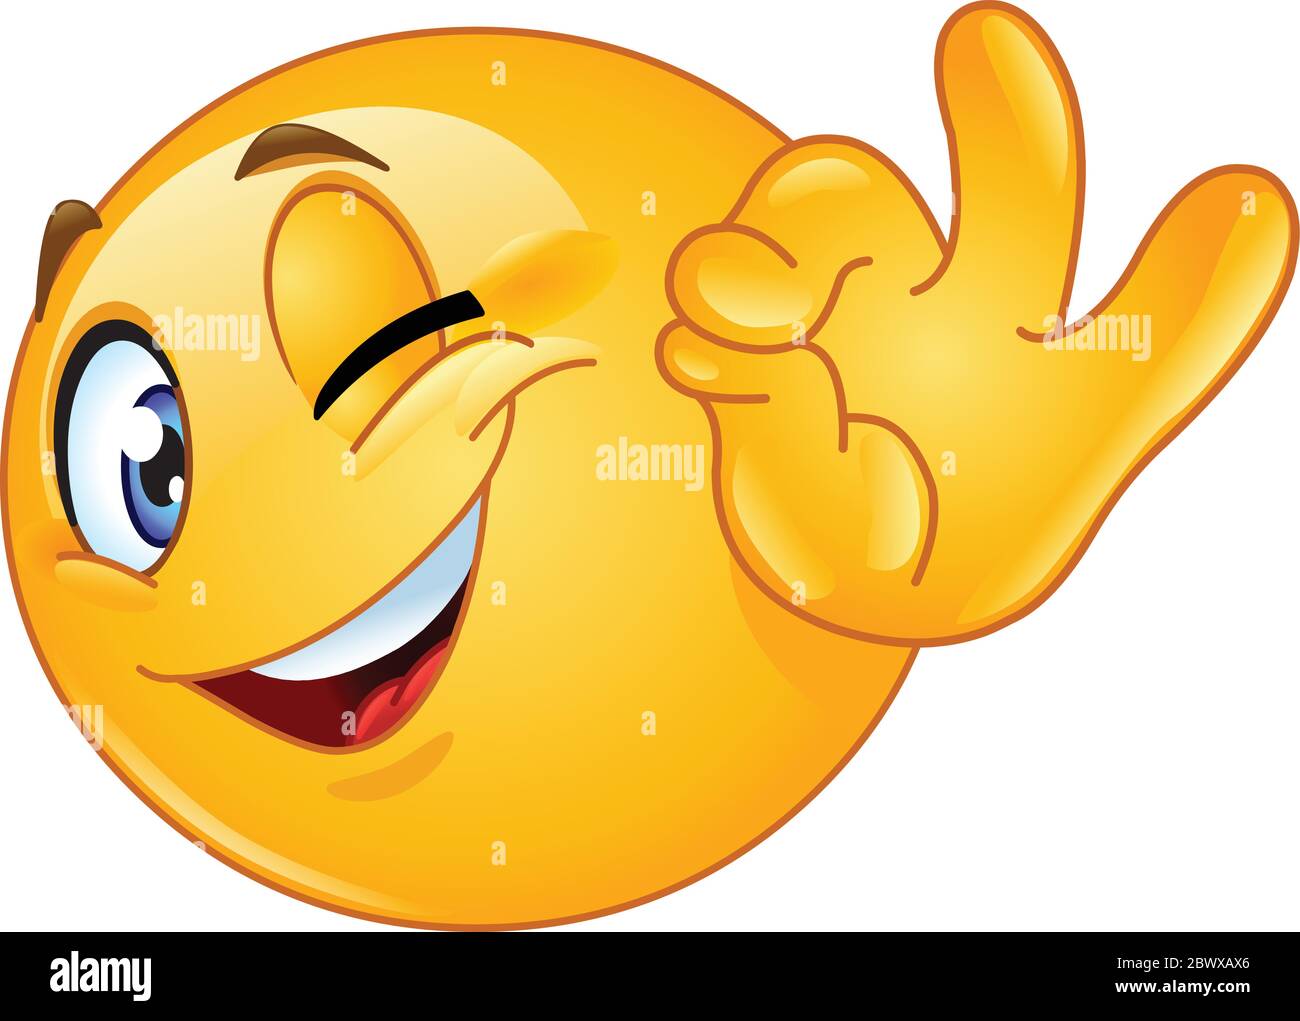 Winking emoticon showing ok sign Stock Vector